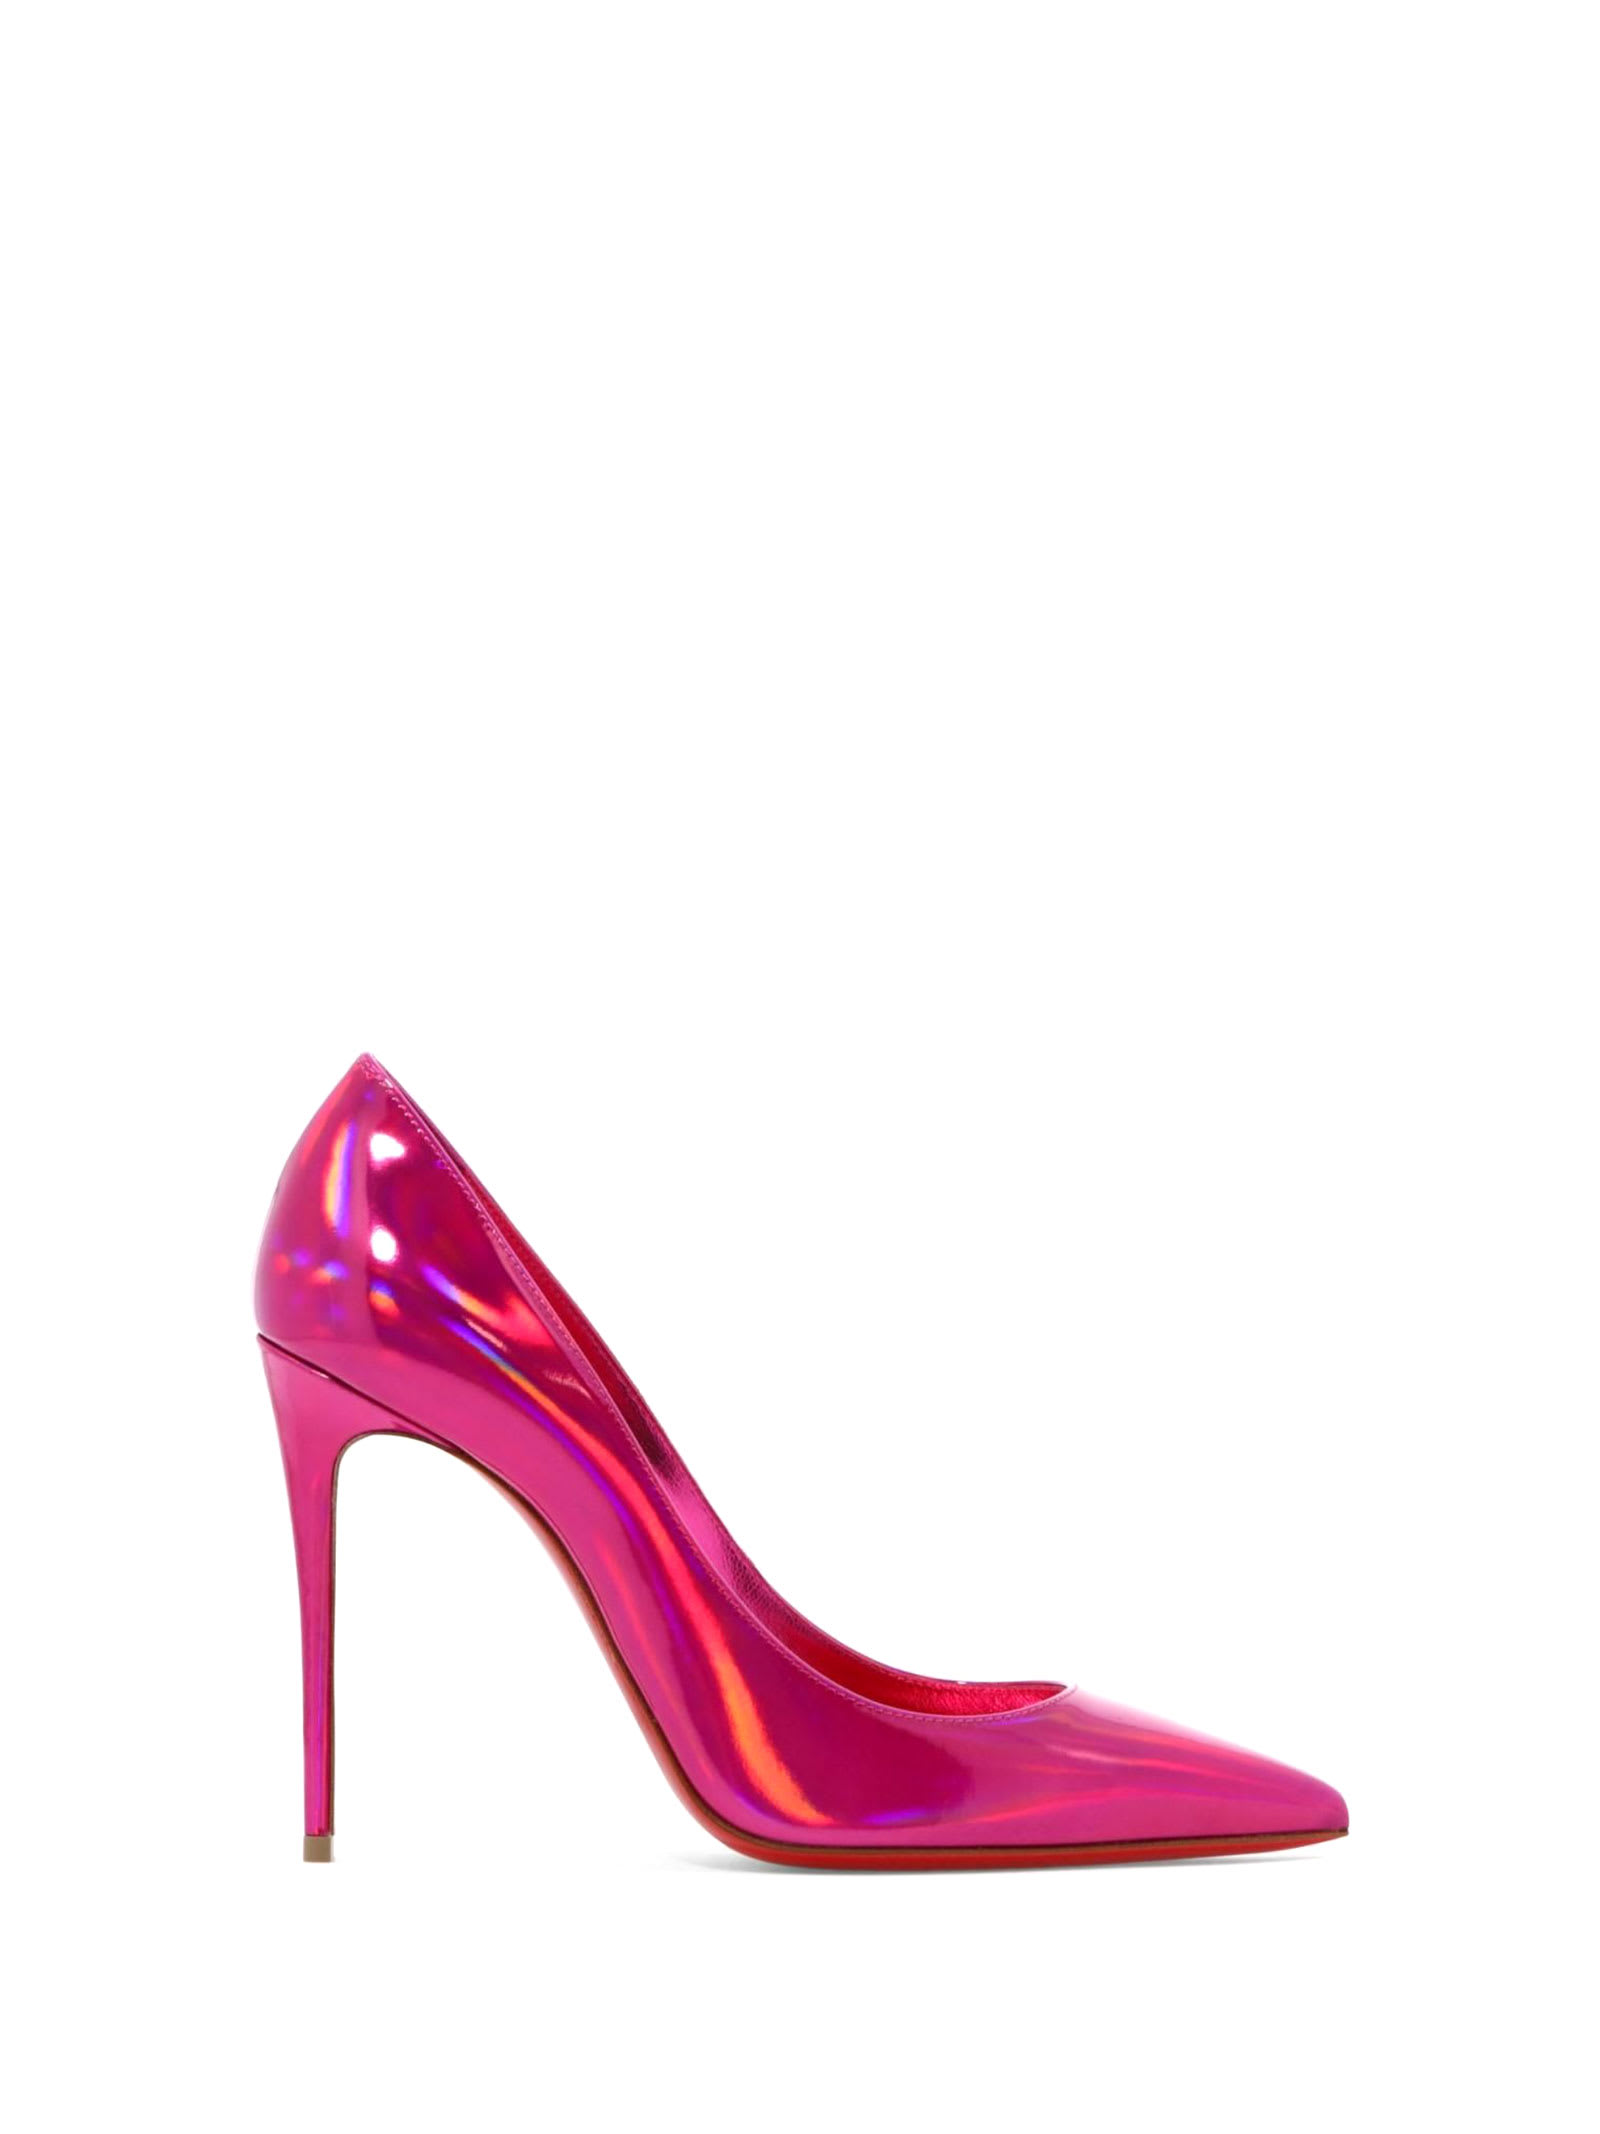 Christian Louboutin Kate Patent Psychic Leather Pumps